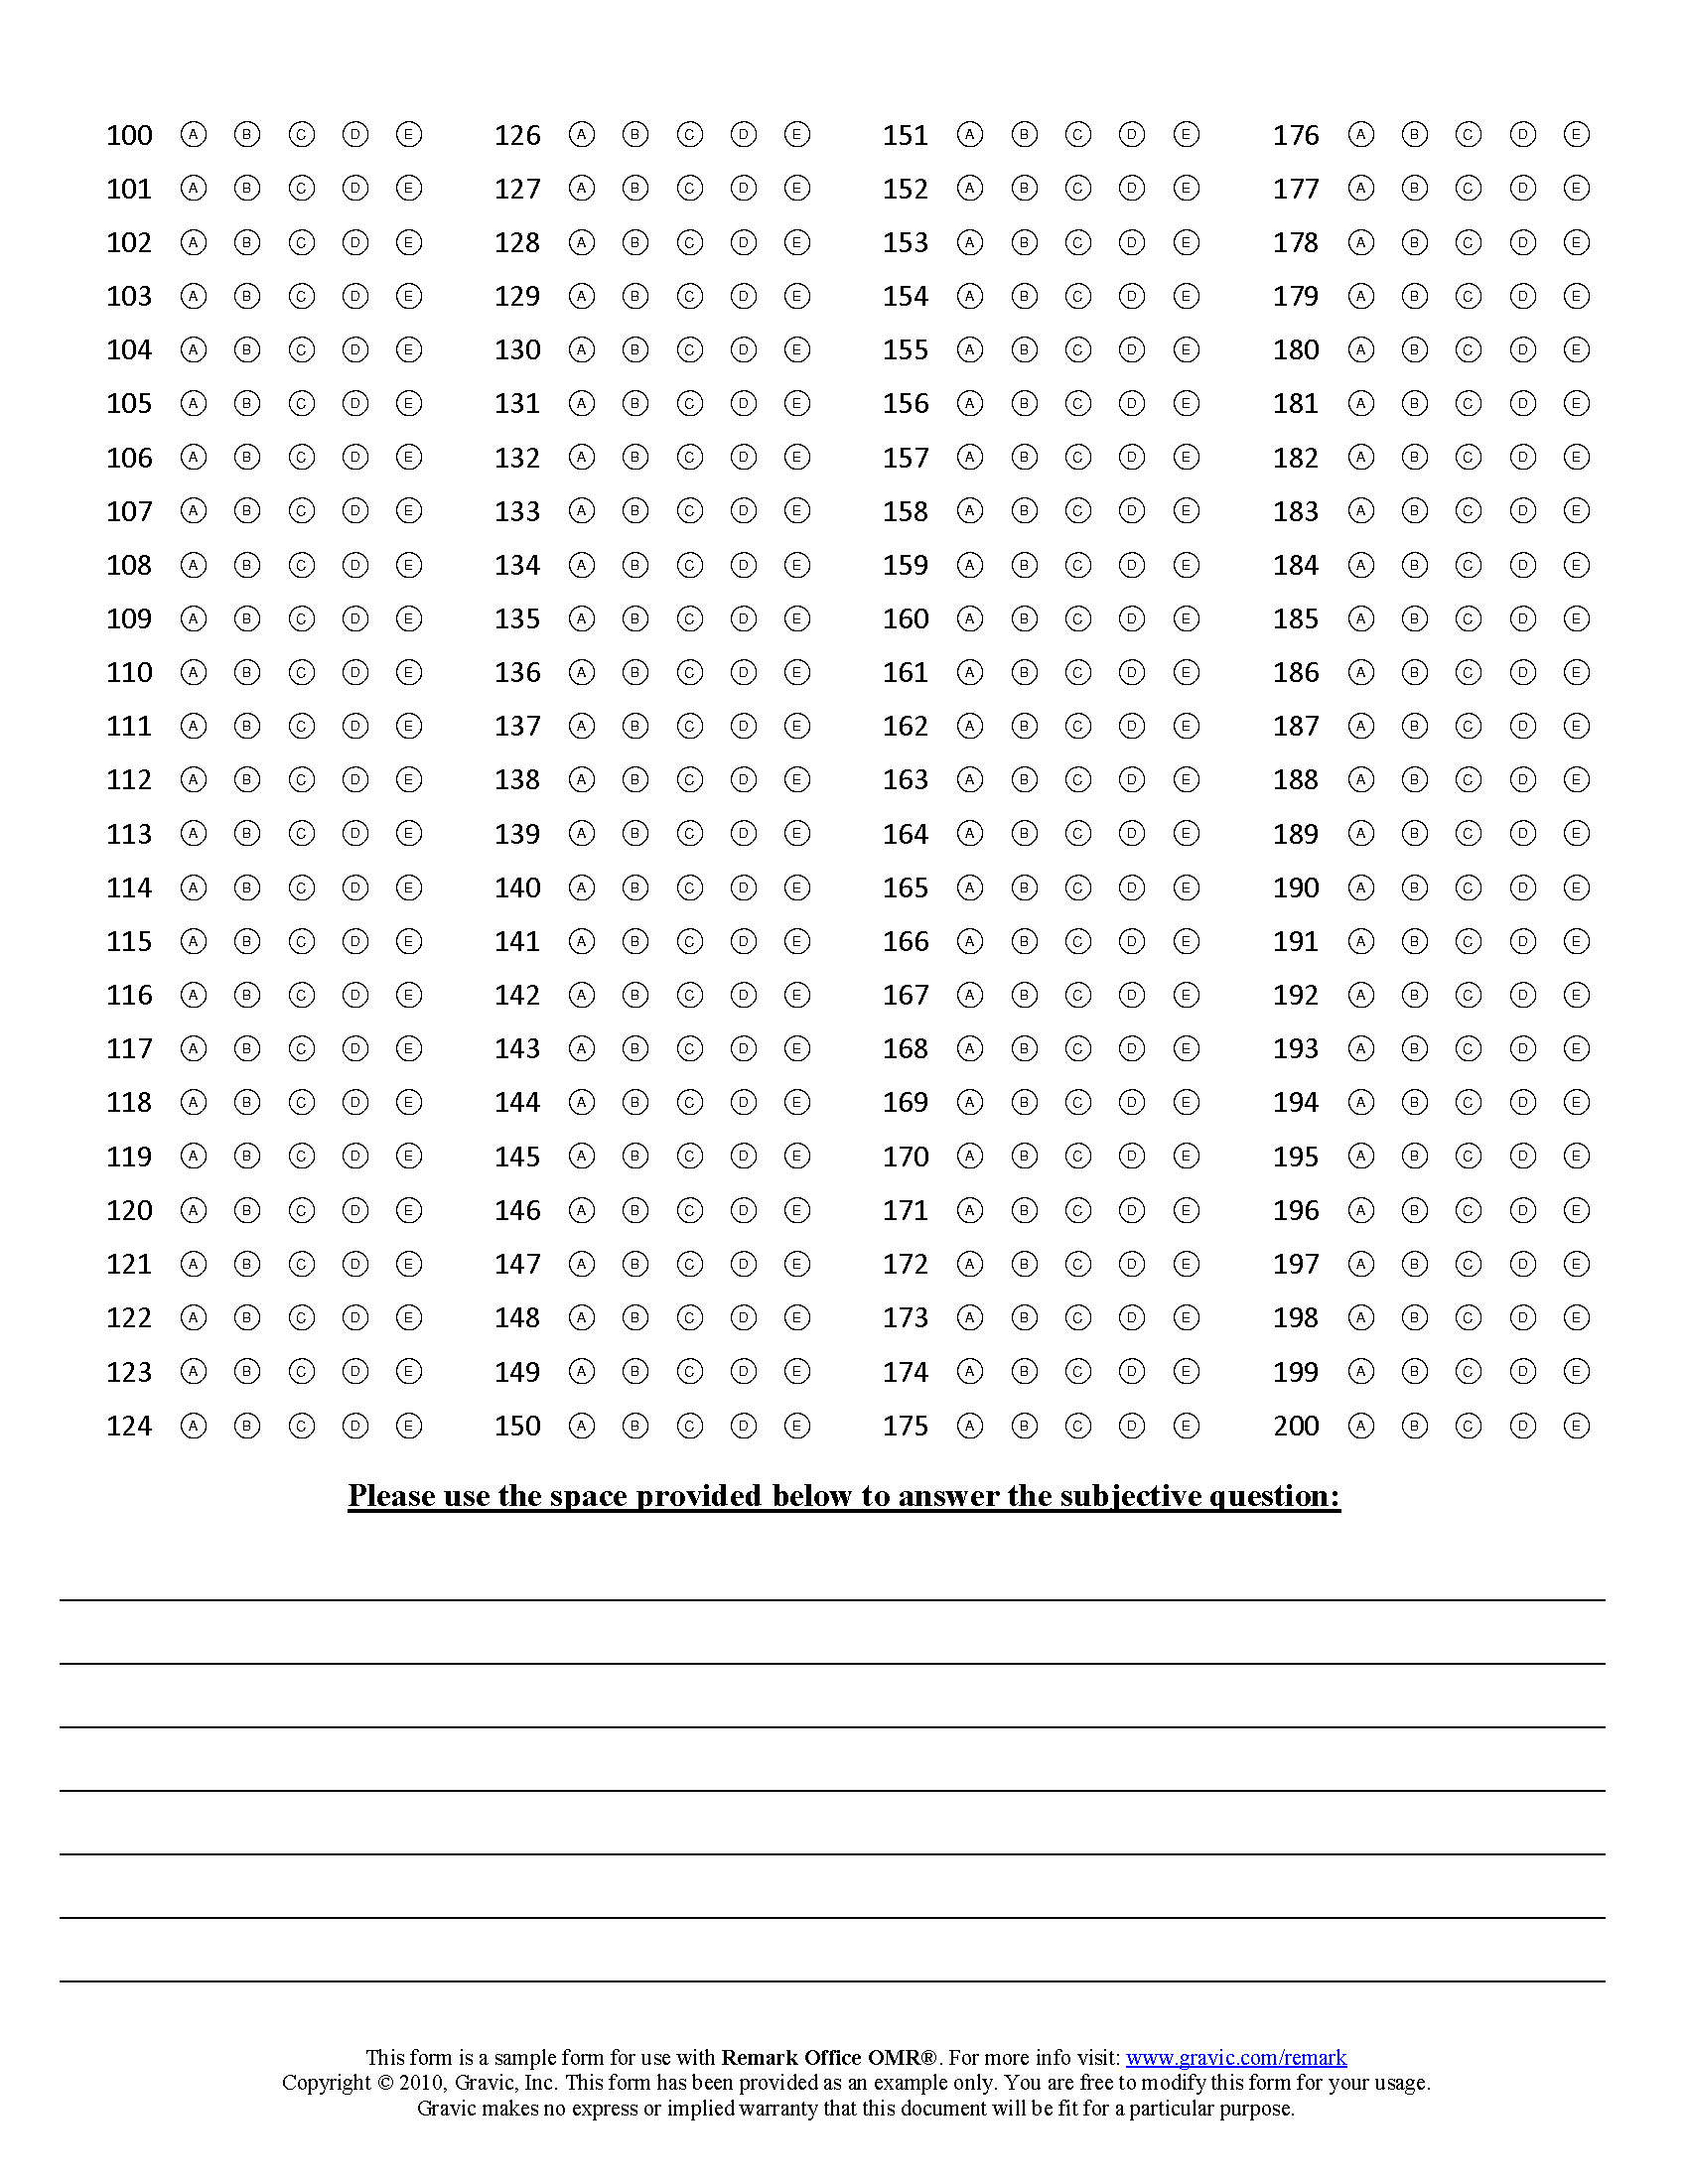 200 Question Test Answer Sheet with Subjective Question · Remark Software